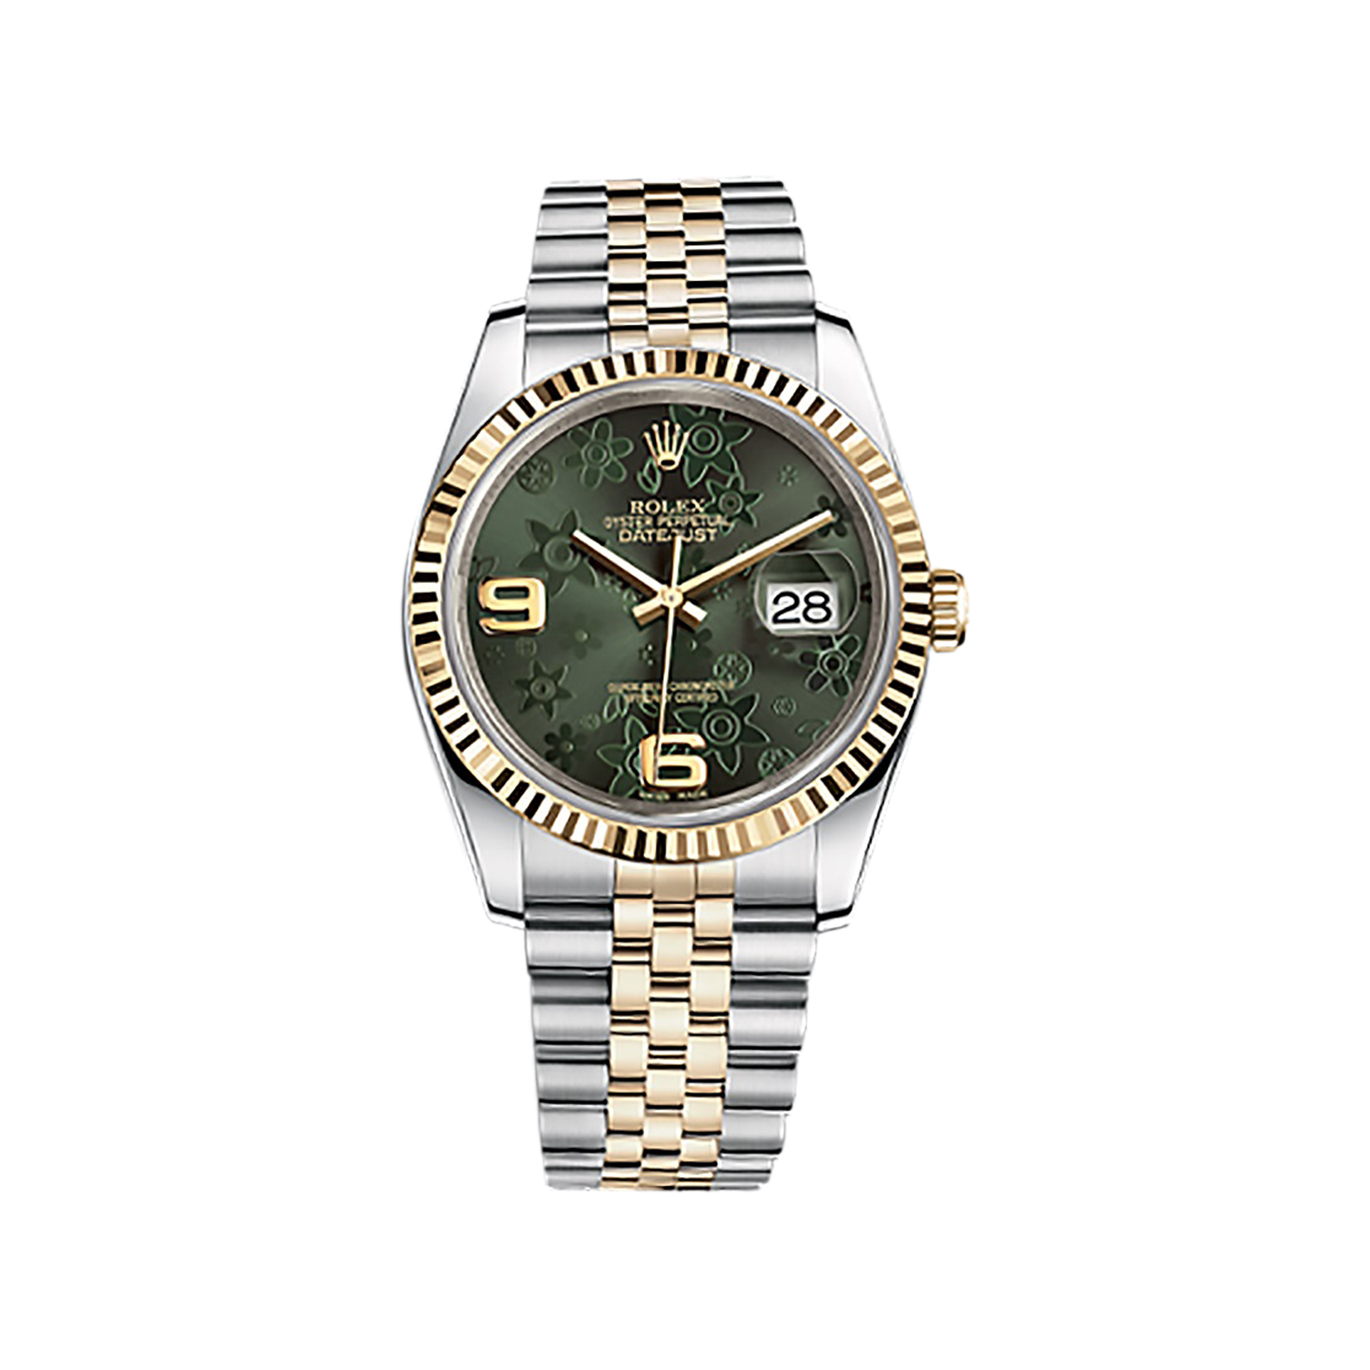 Datejust 36 116233 Gold & Stainless Steel Watch (Green Floral Motif)